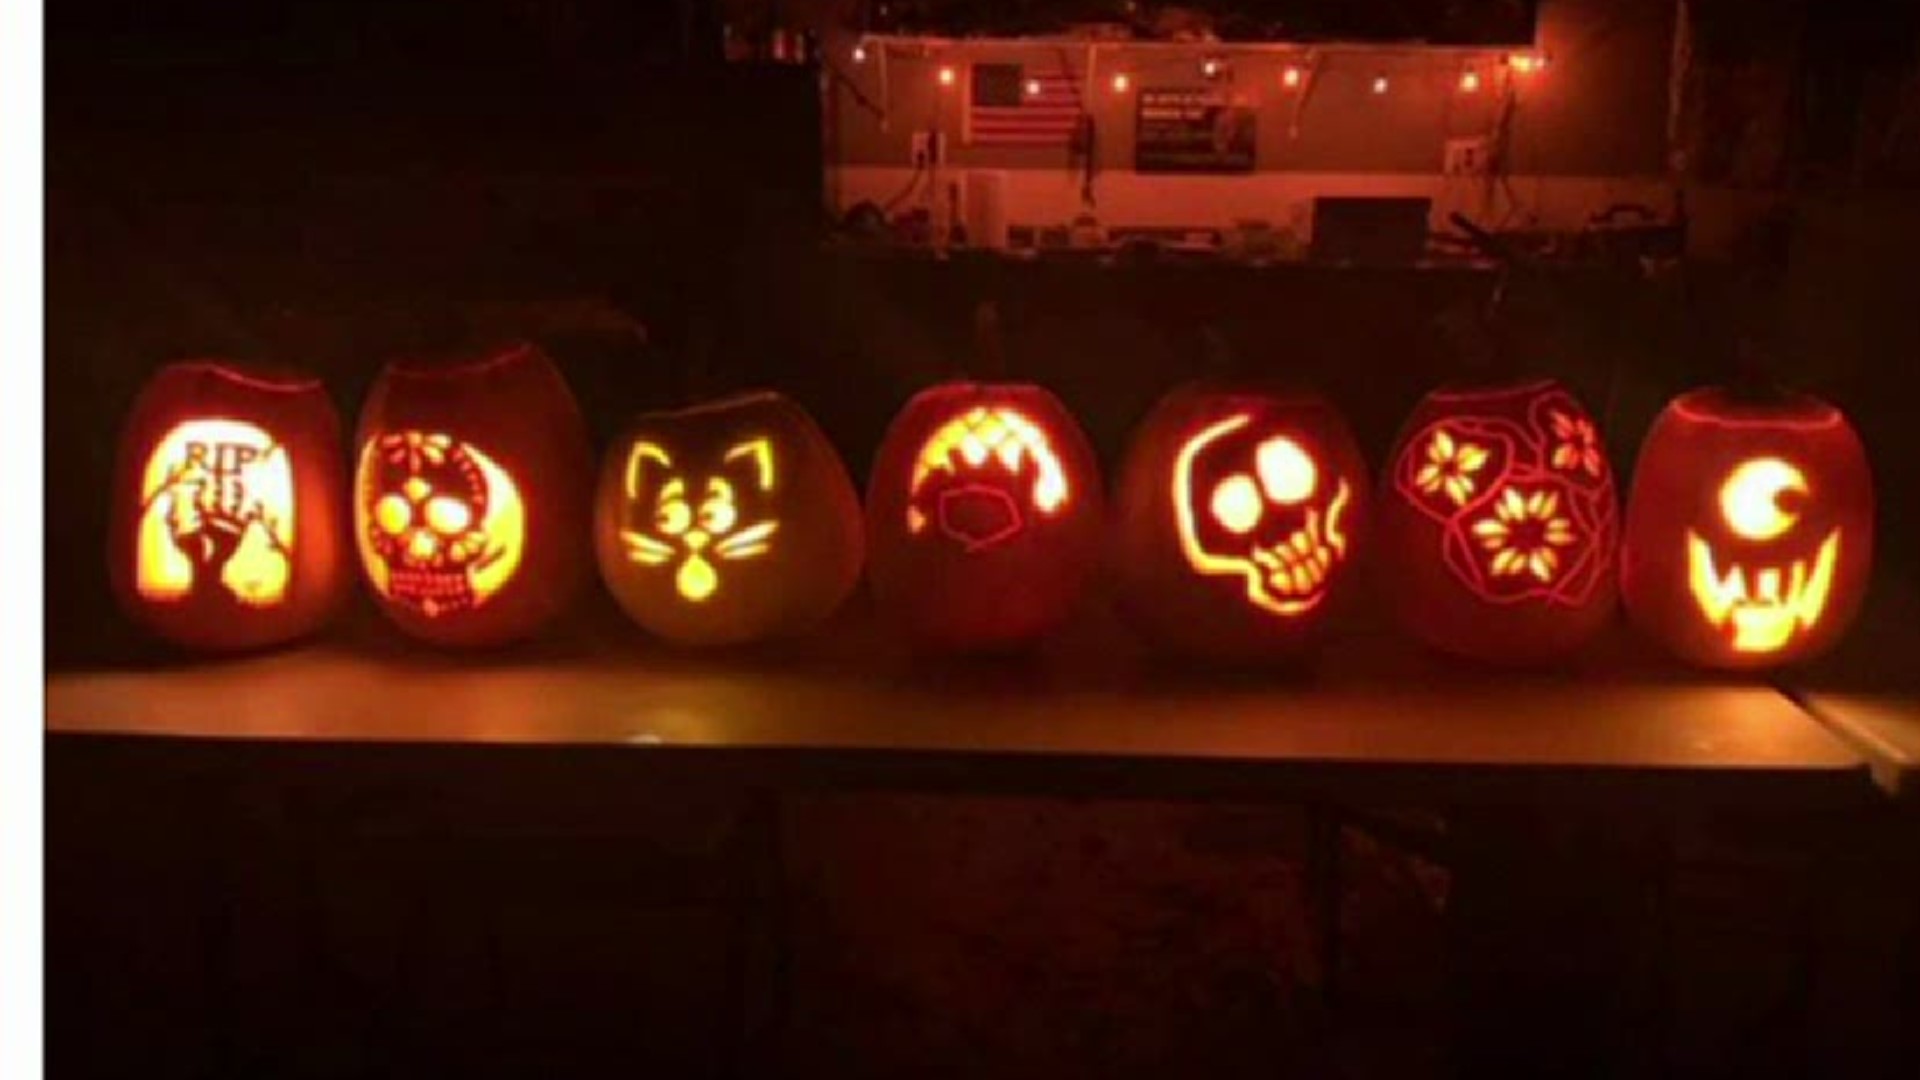 Carving pumpkins is a rite of passage in October, snd so many of you, as expected, served up all sorts of ghoulish gourds when Newswatch 16 put out the call!